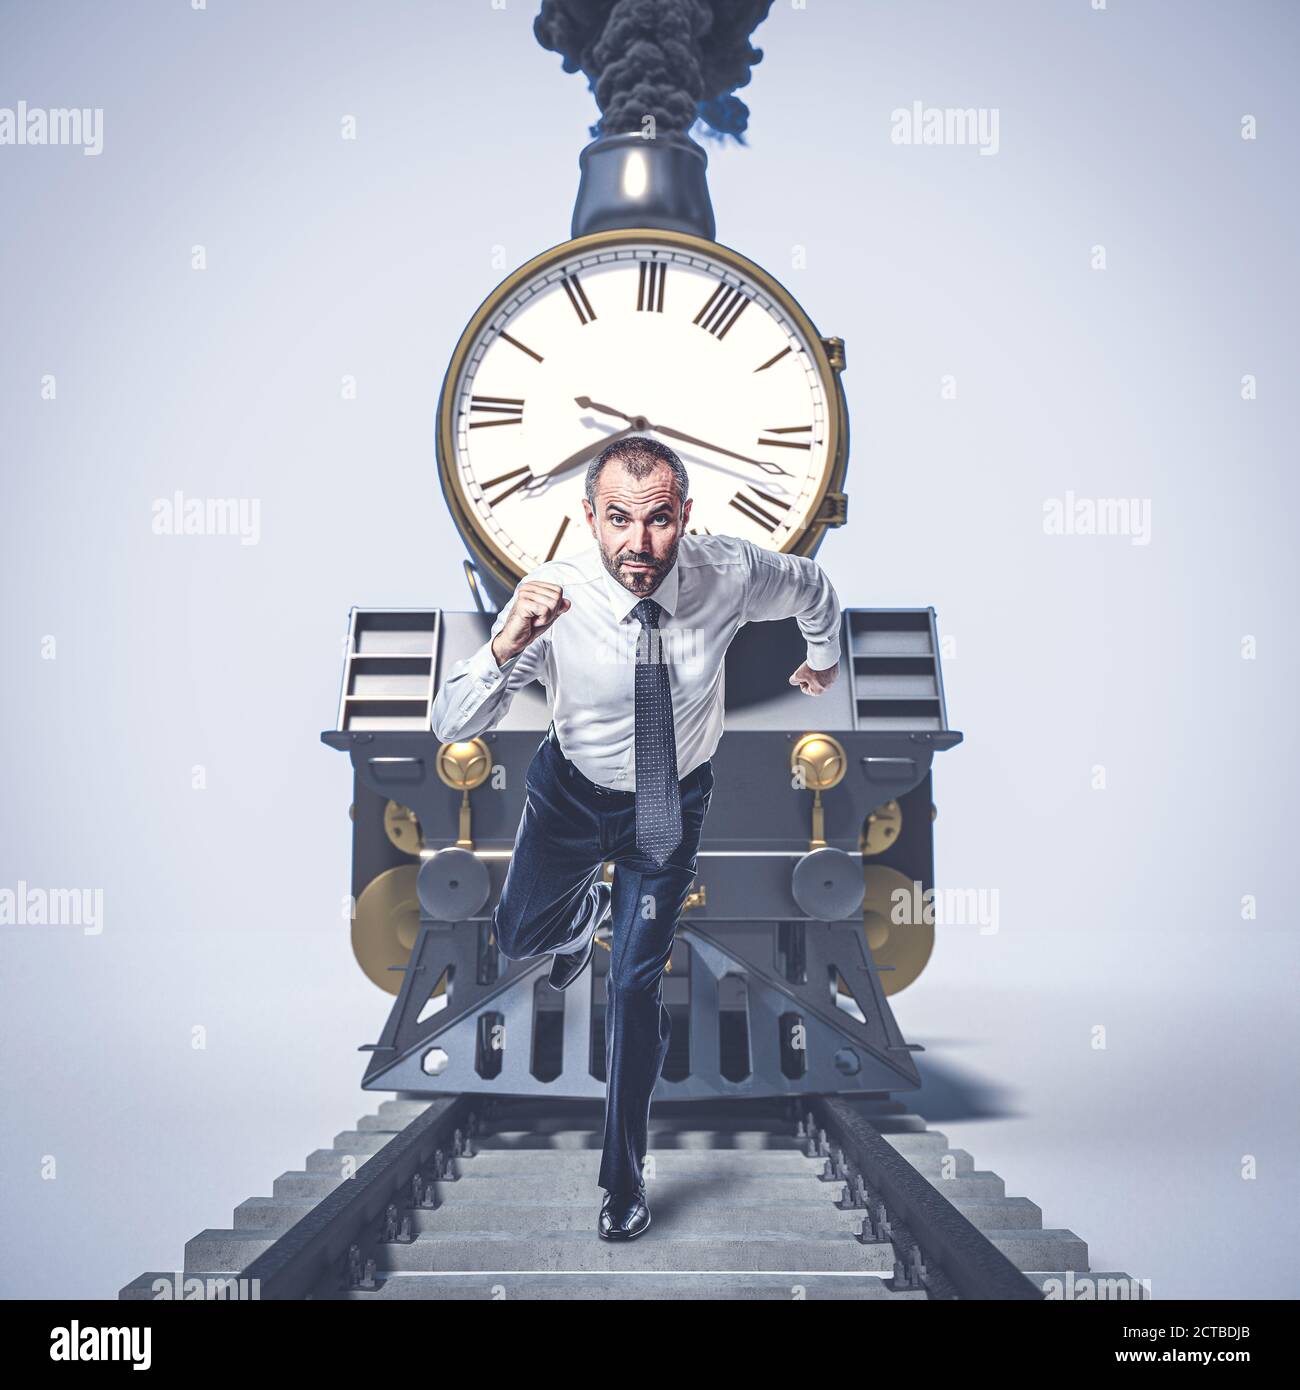 man running on the tracks and running away from a train with a big clock. concept of time, urgency. Stock Photo